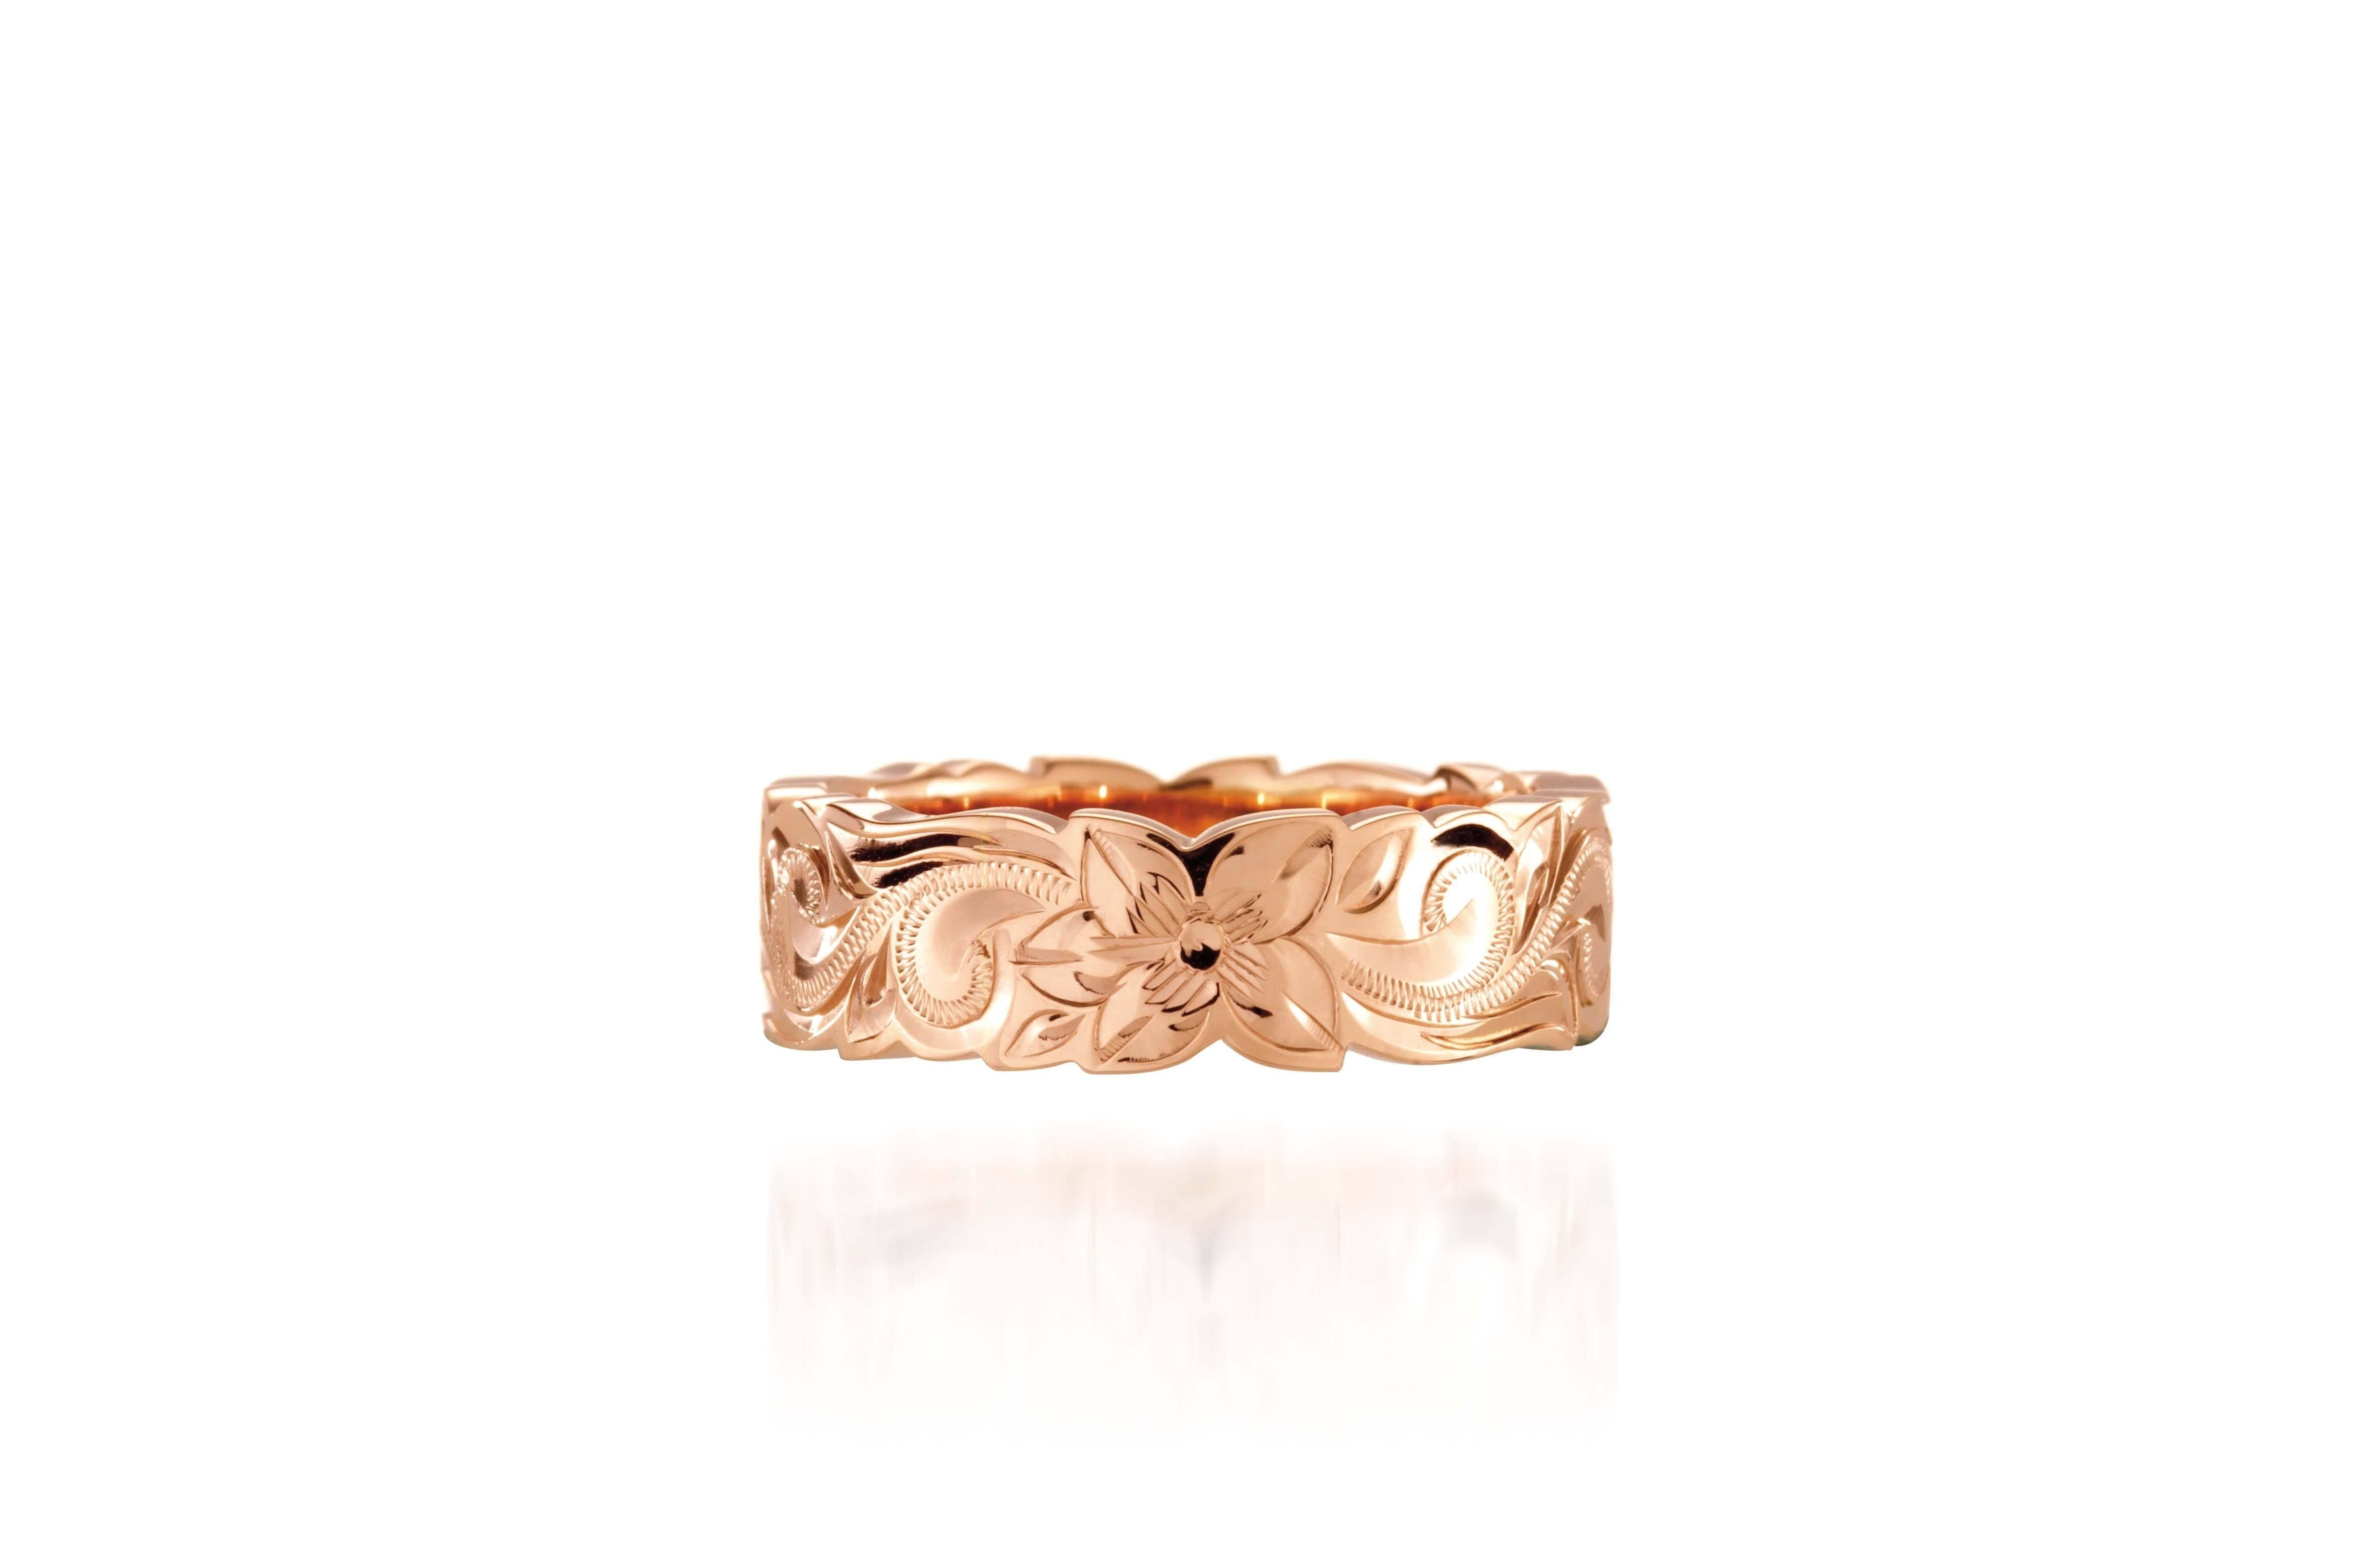 In this picture there is a rose gold cut out ring with hand engravings including flowers and scrolls.